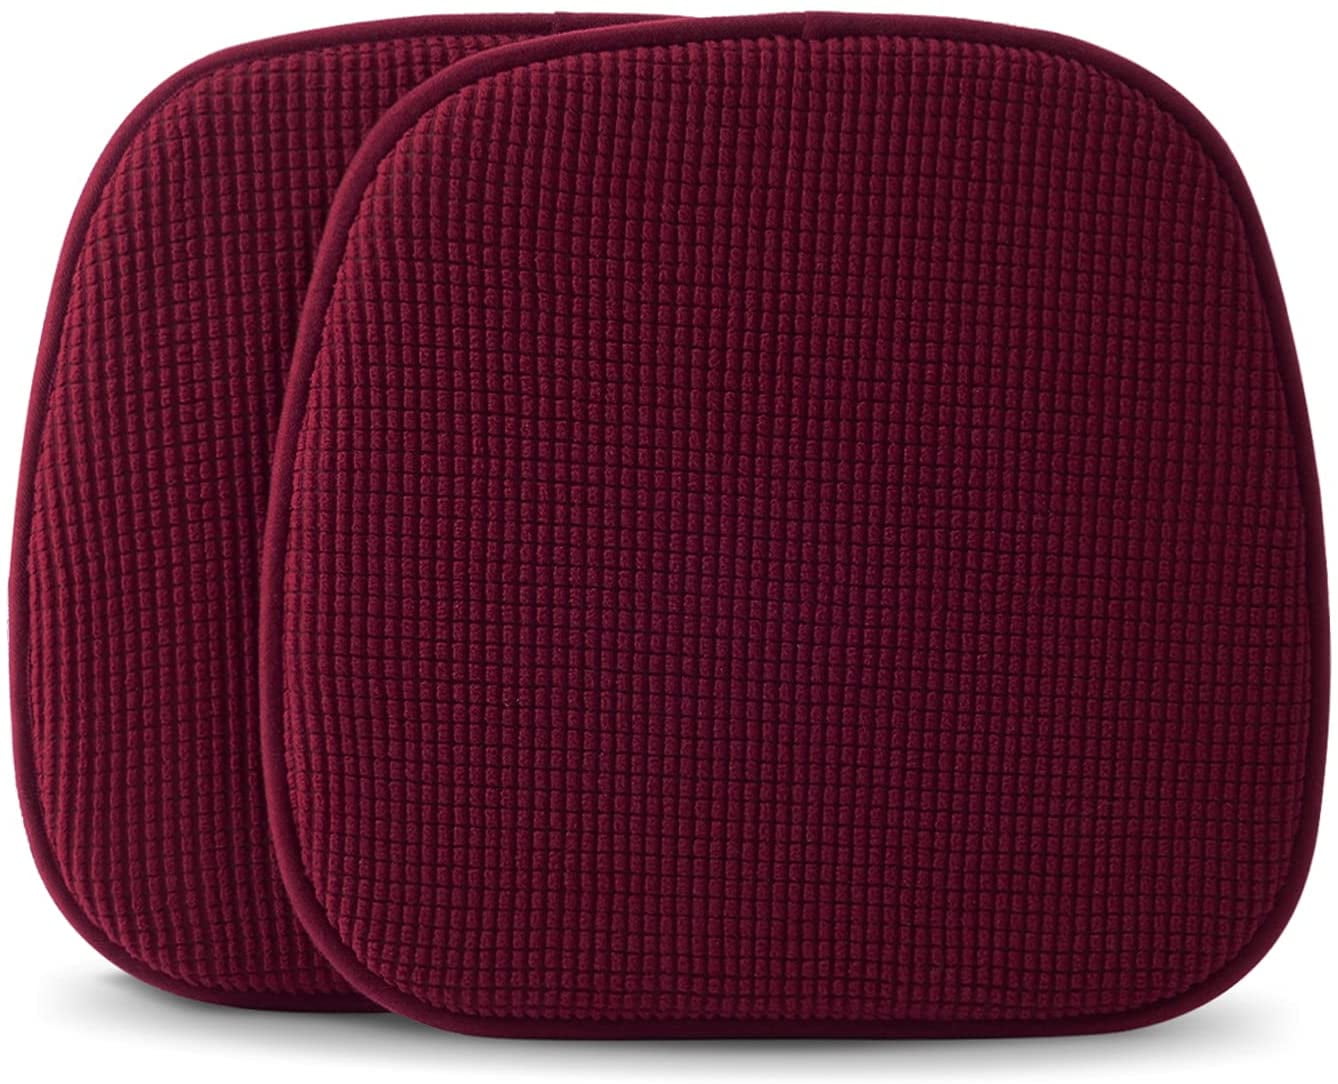 2X Purple PSC-RYL-01 Seat Cushion 17.5 x 15.75 x 2 Washable Cover New in  Box 815068012533